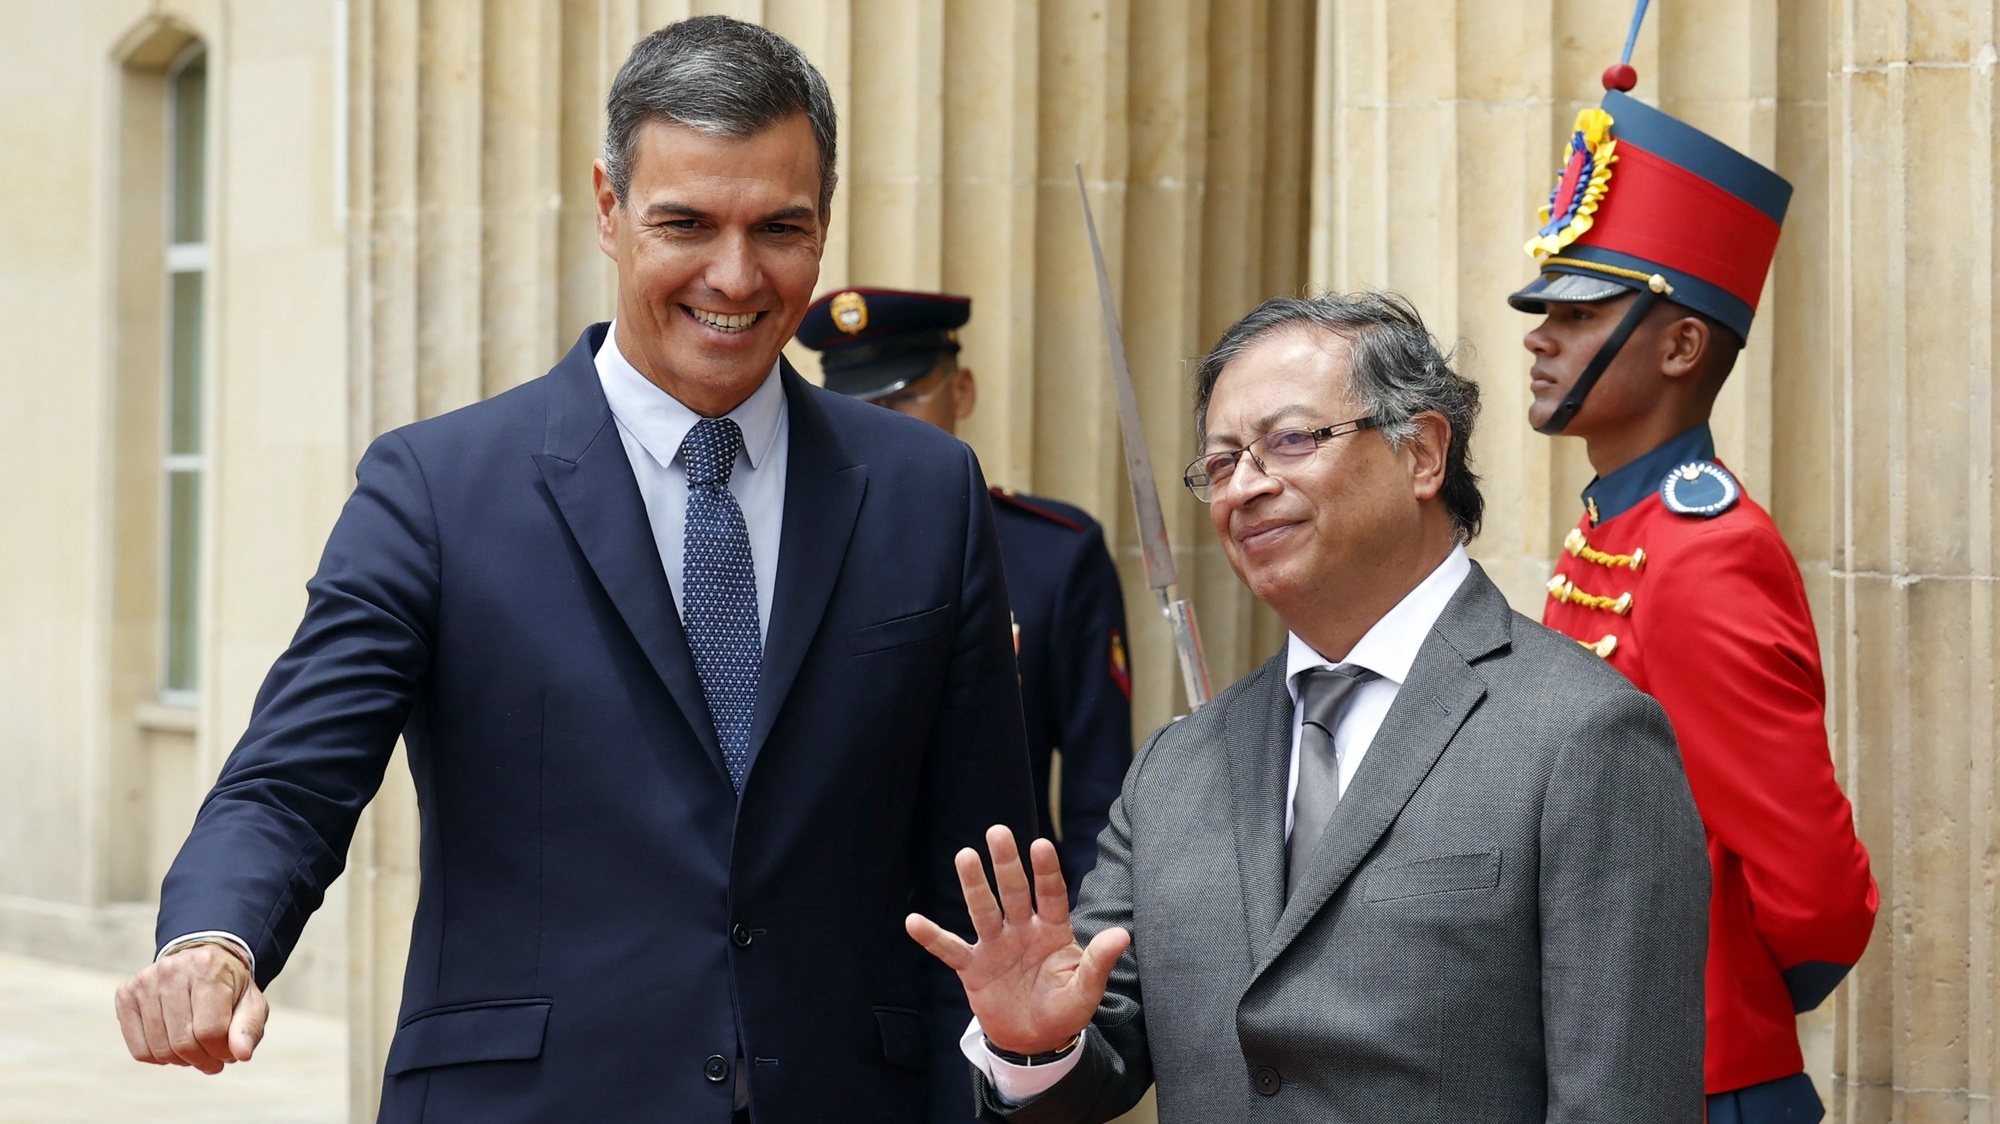 epa10136587 Spanish Prime Minister Pedro Sanchez (L), together with the President of Colombia Gustavo Petro, attend a military honors ceremony, in Bogota, Colombia, 24 August 2022.  EPA/Mauricio Duenas Castaneda